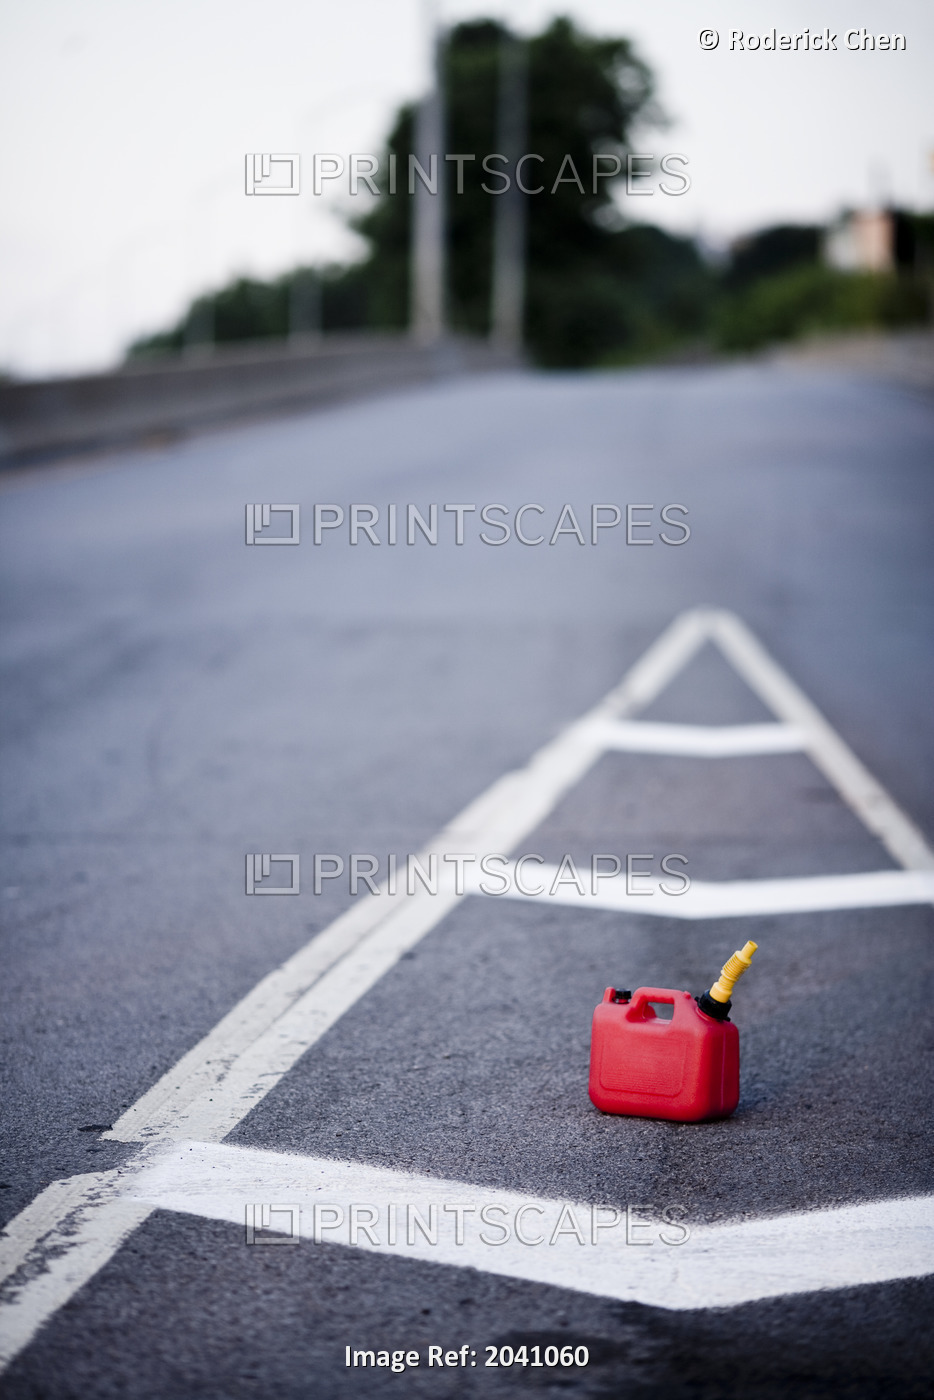 Portable Plastic Gas Can At The Entrance Of A Highway On Ramp, Montreal, Quebec